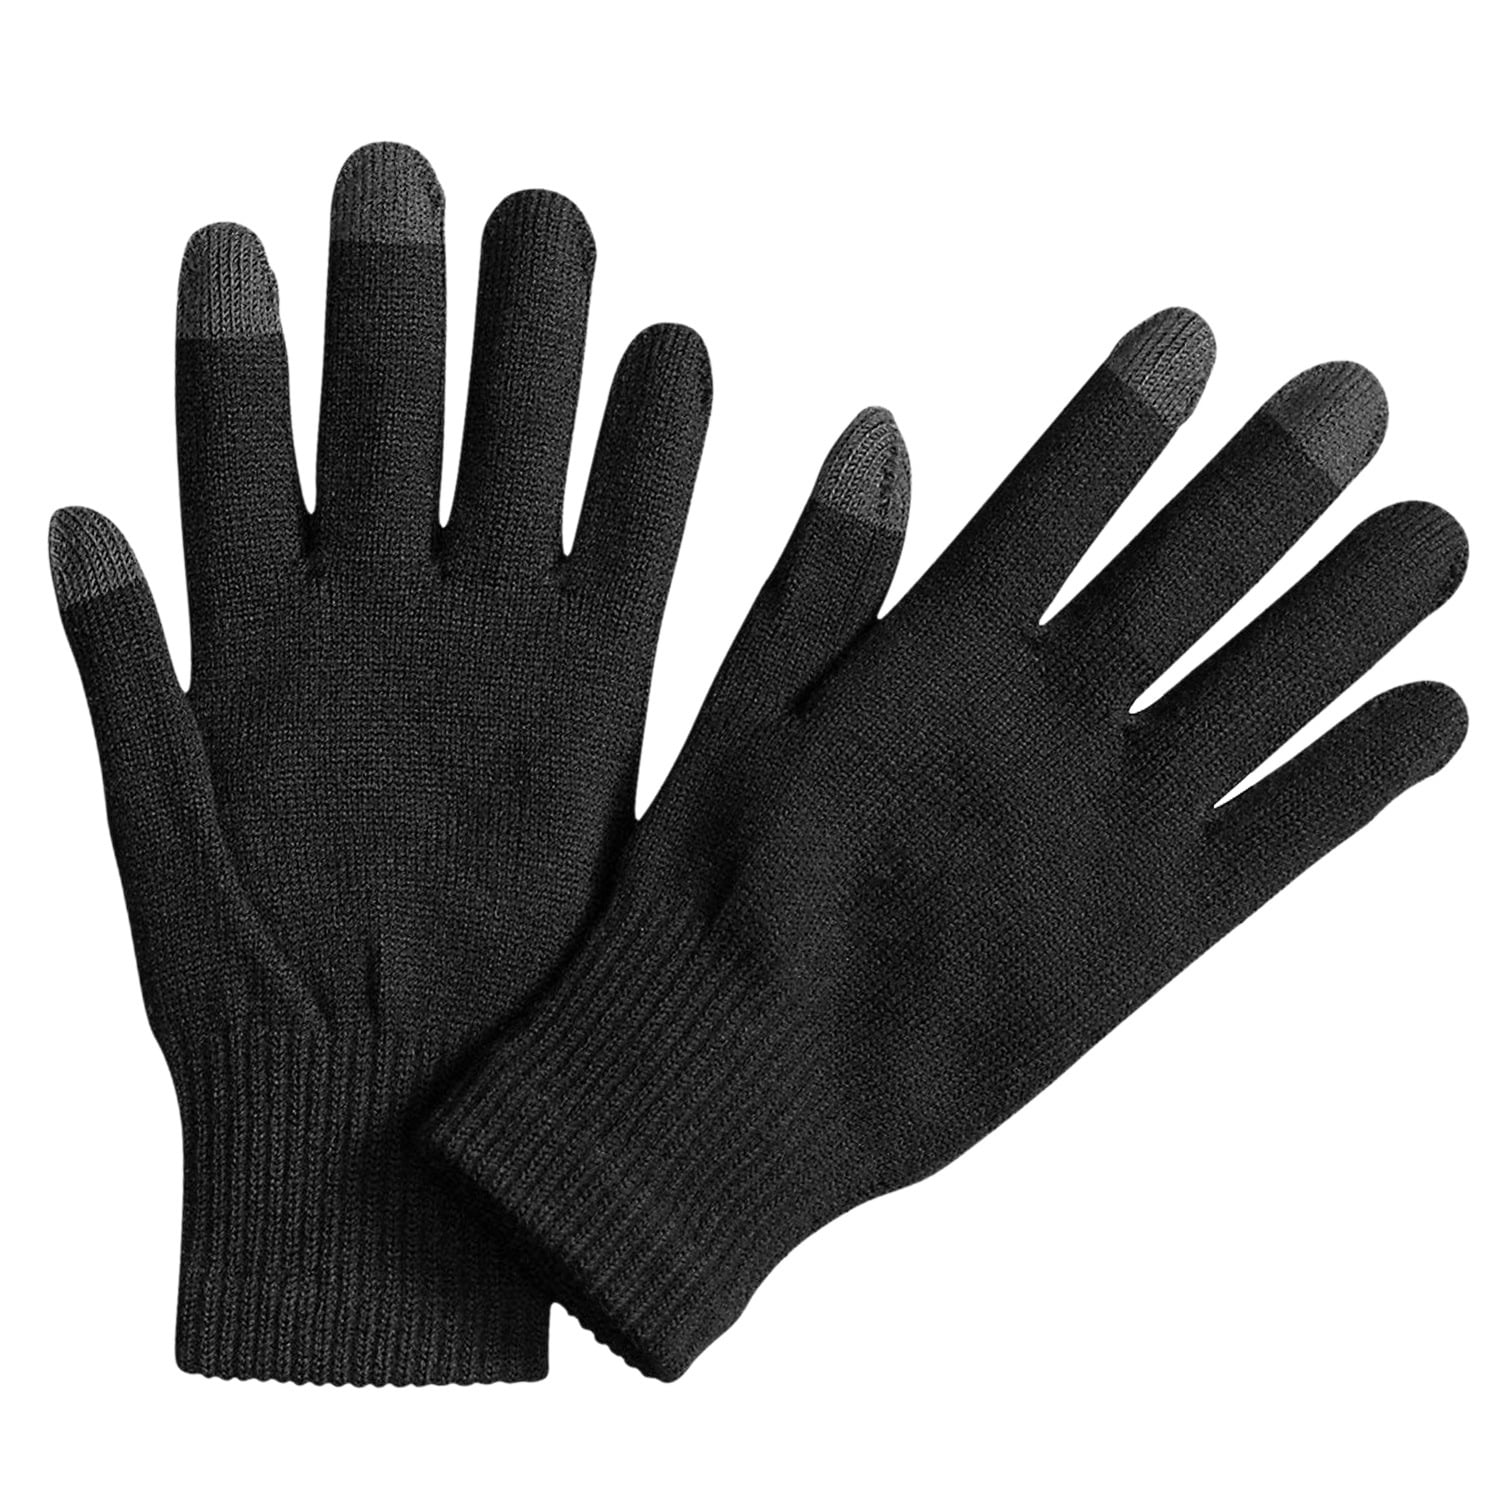 Acexy Winter Thin Thermal Gloves for Men & Women Cold Weather Gloves Windproof Winter Warm Gloves for Running Lightweight Anti-Slip Touch Screen Gloves